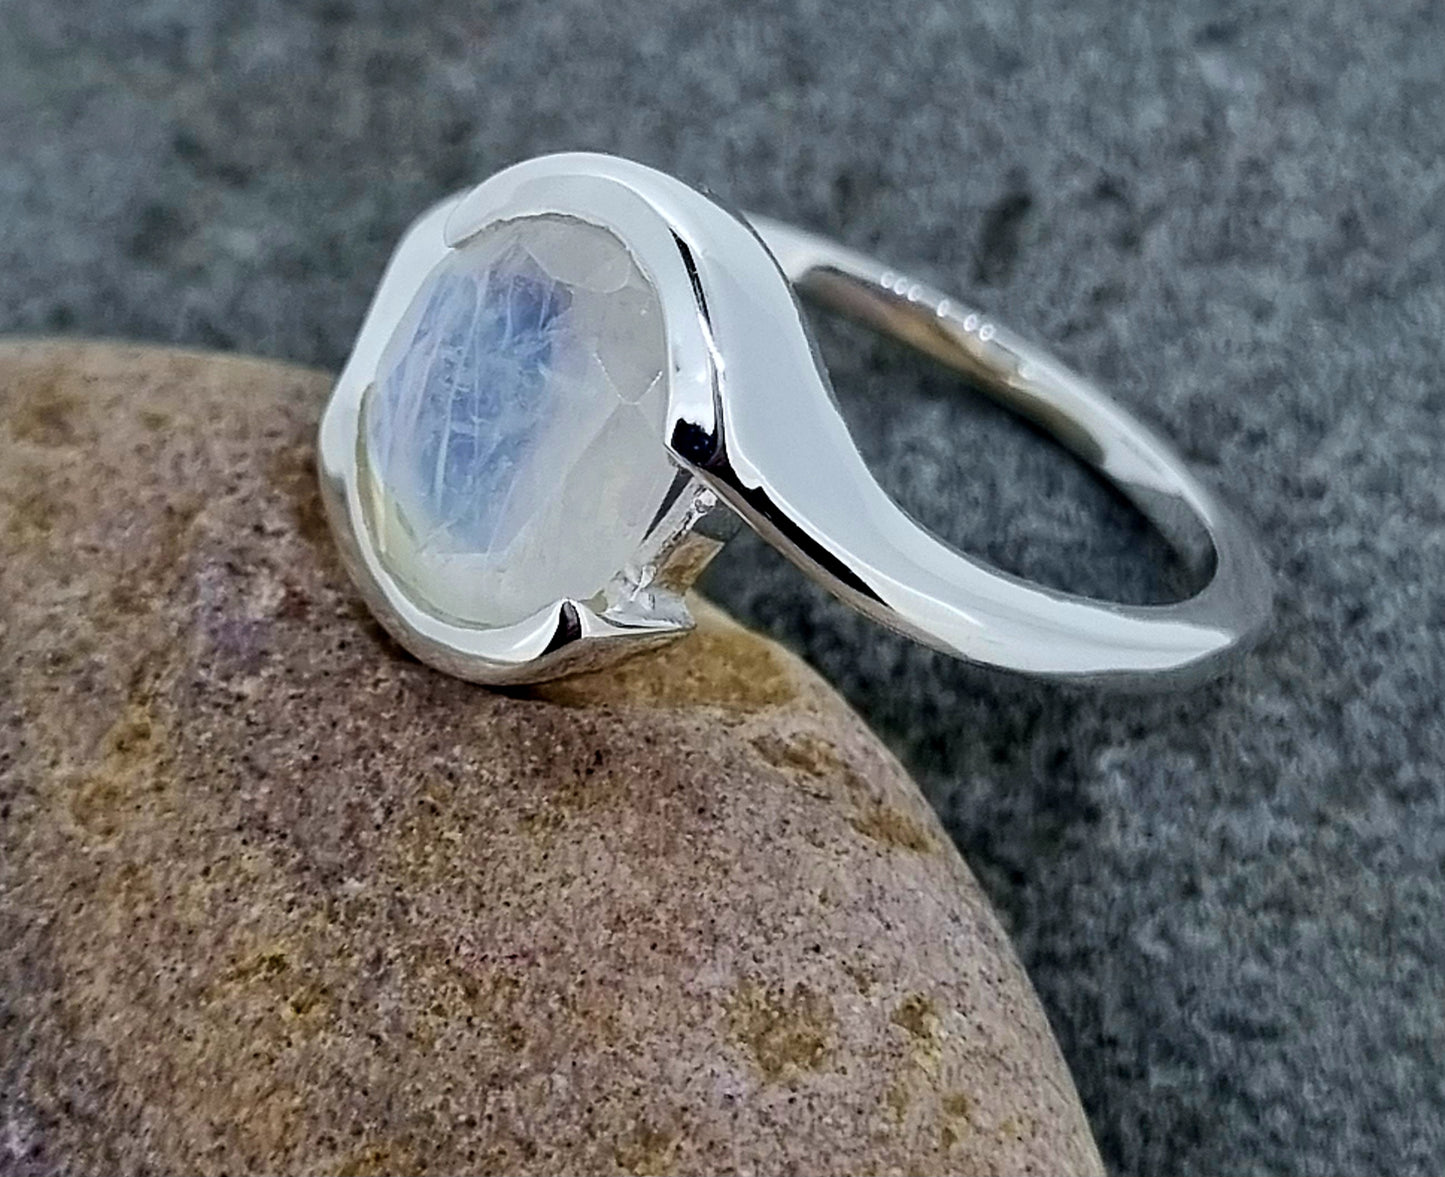 Beam - Blue Moonstone Shimmering & Engulfed In This Sunken Bed Of Sterling Silver